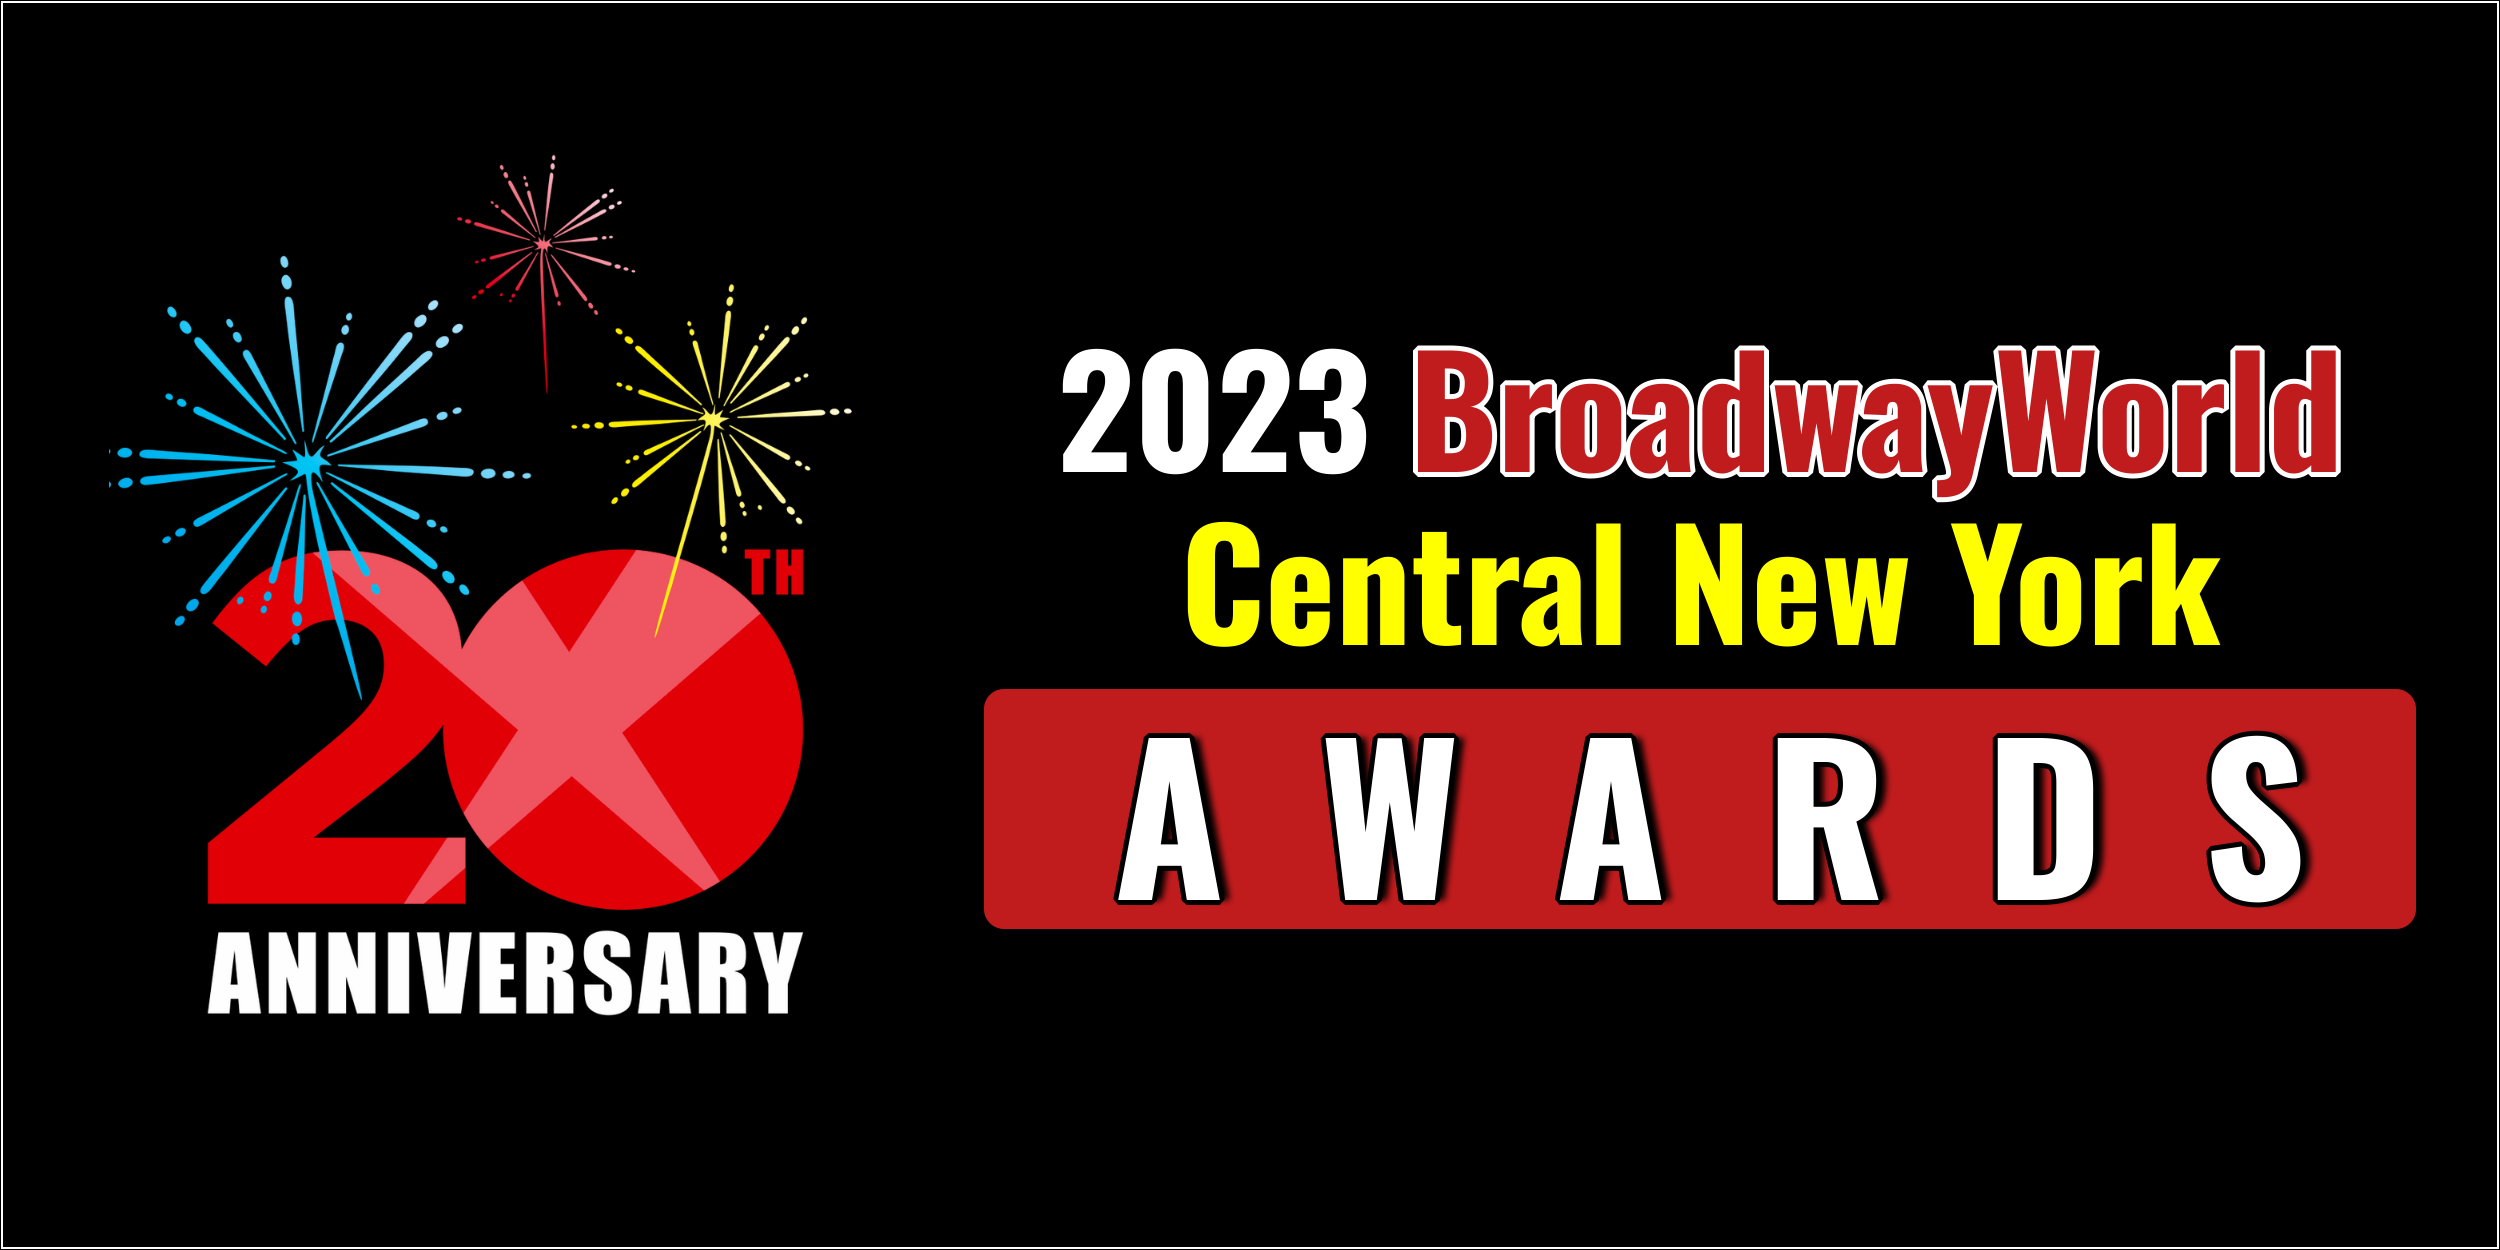 BroadwayWorld Central New York Awards December 5th Standings;  Leads Favorite Local Theatre! 